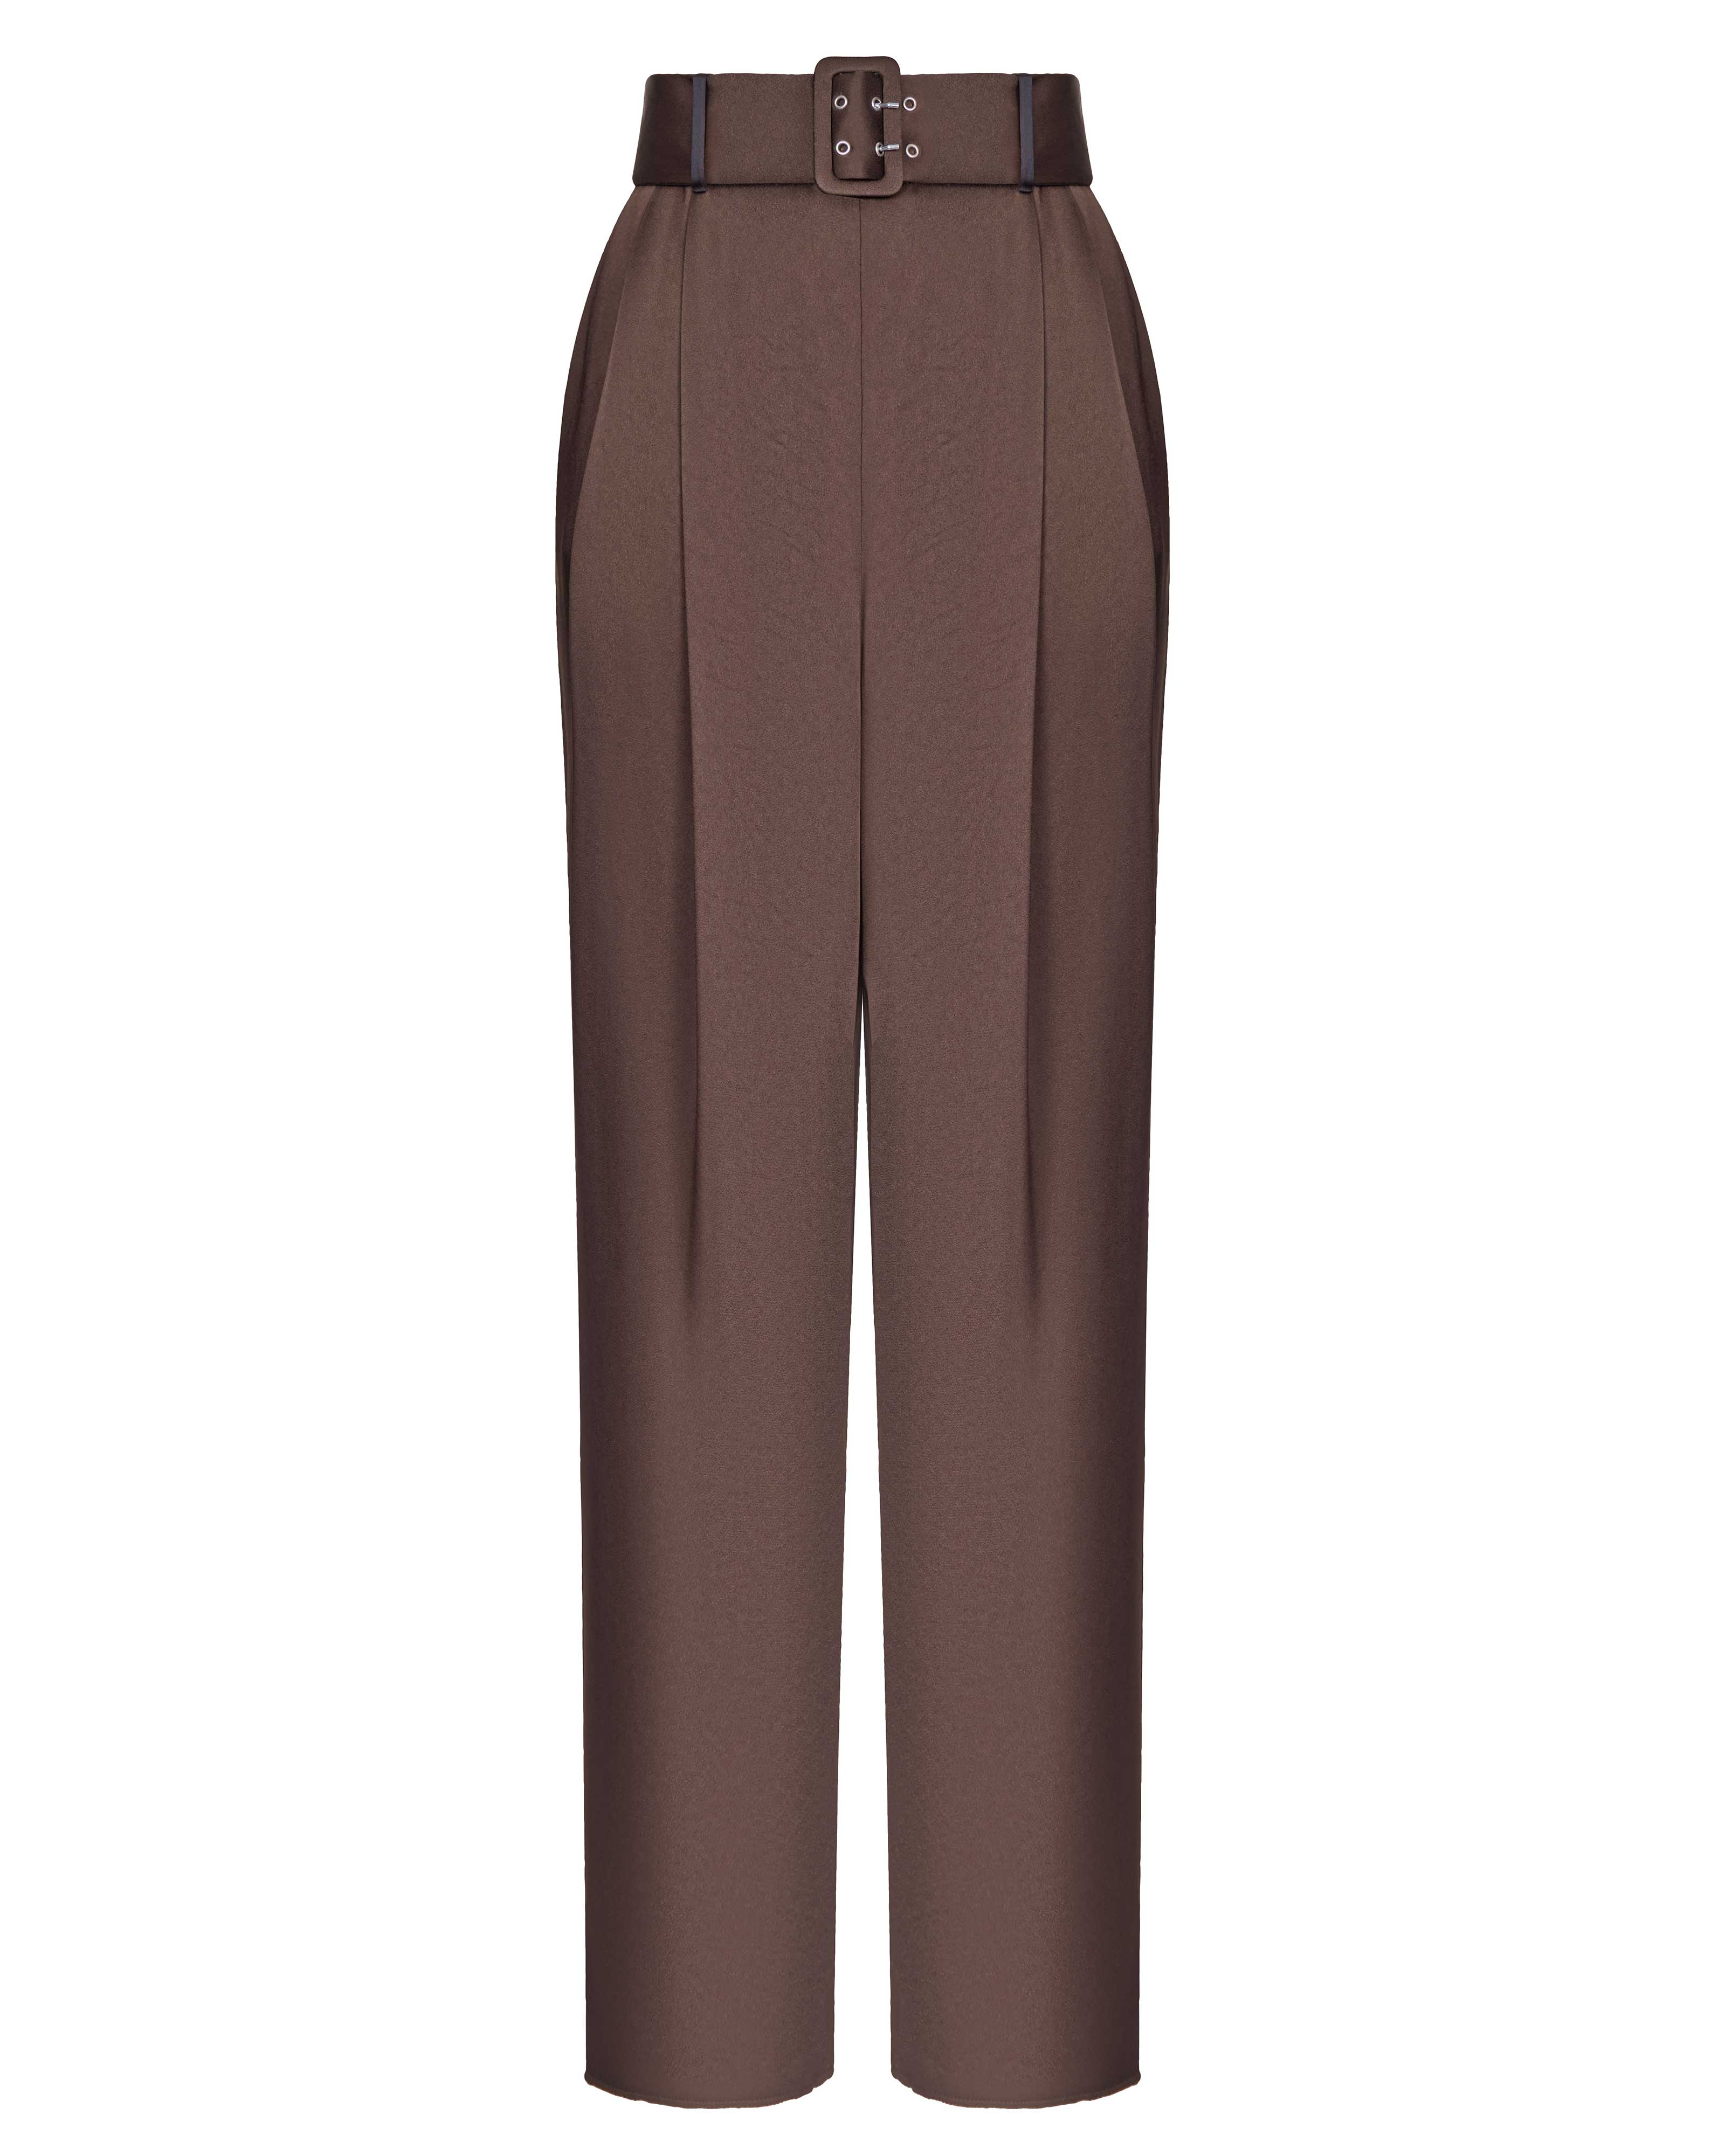 BROWN TROUSERS 2